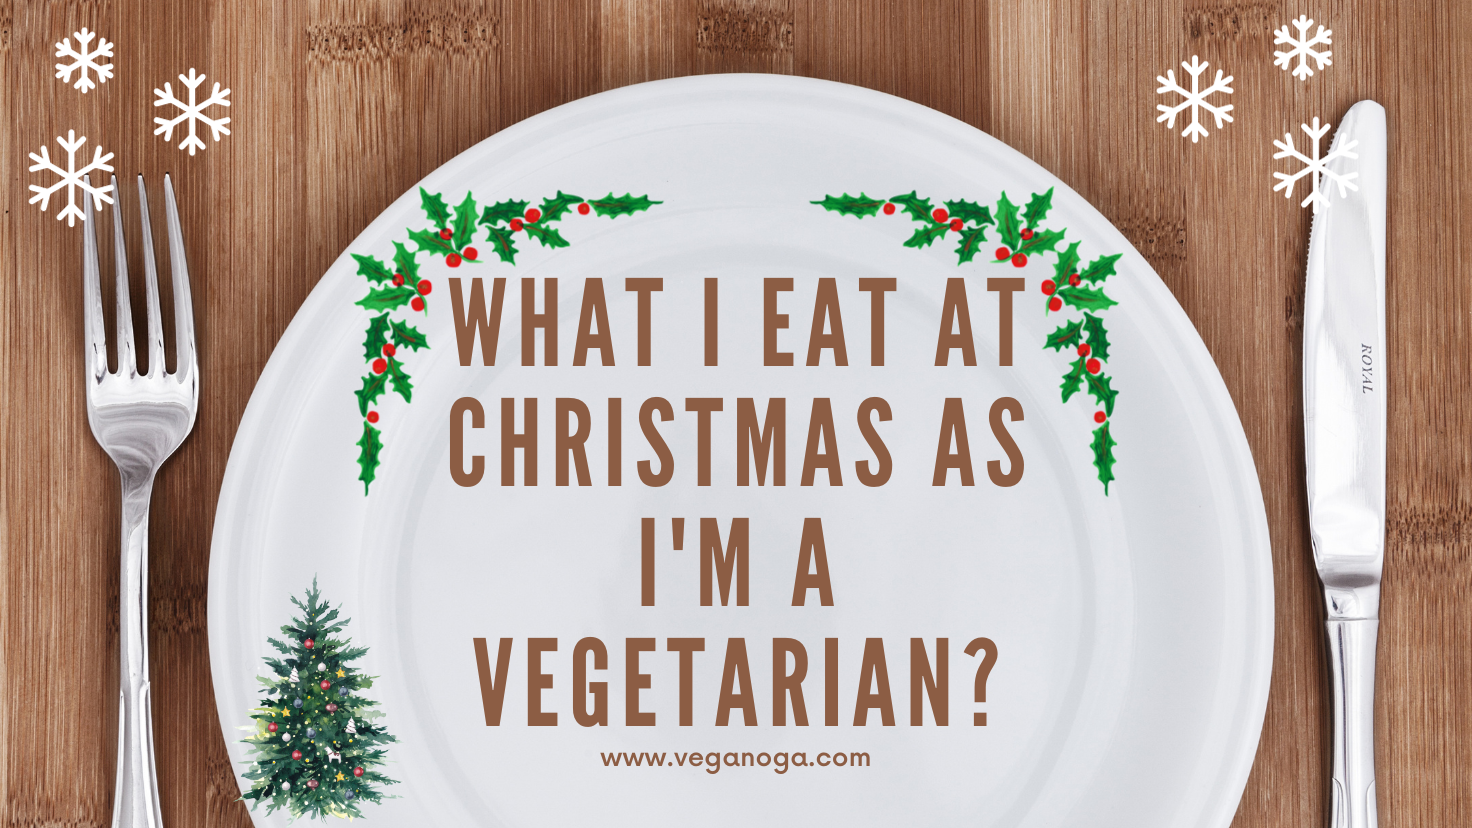 What I Eat at Christmas as I'm a Vegetarian